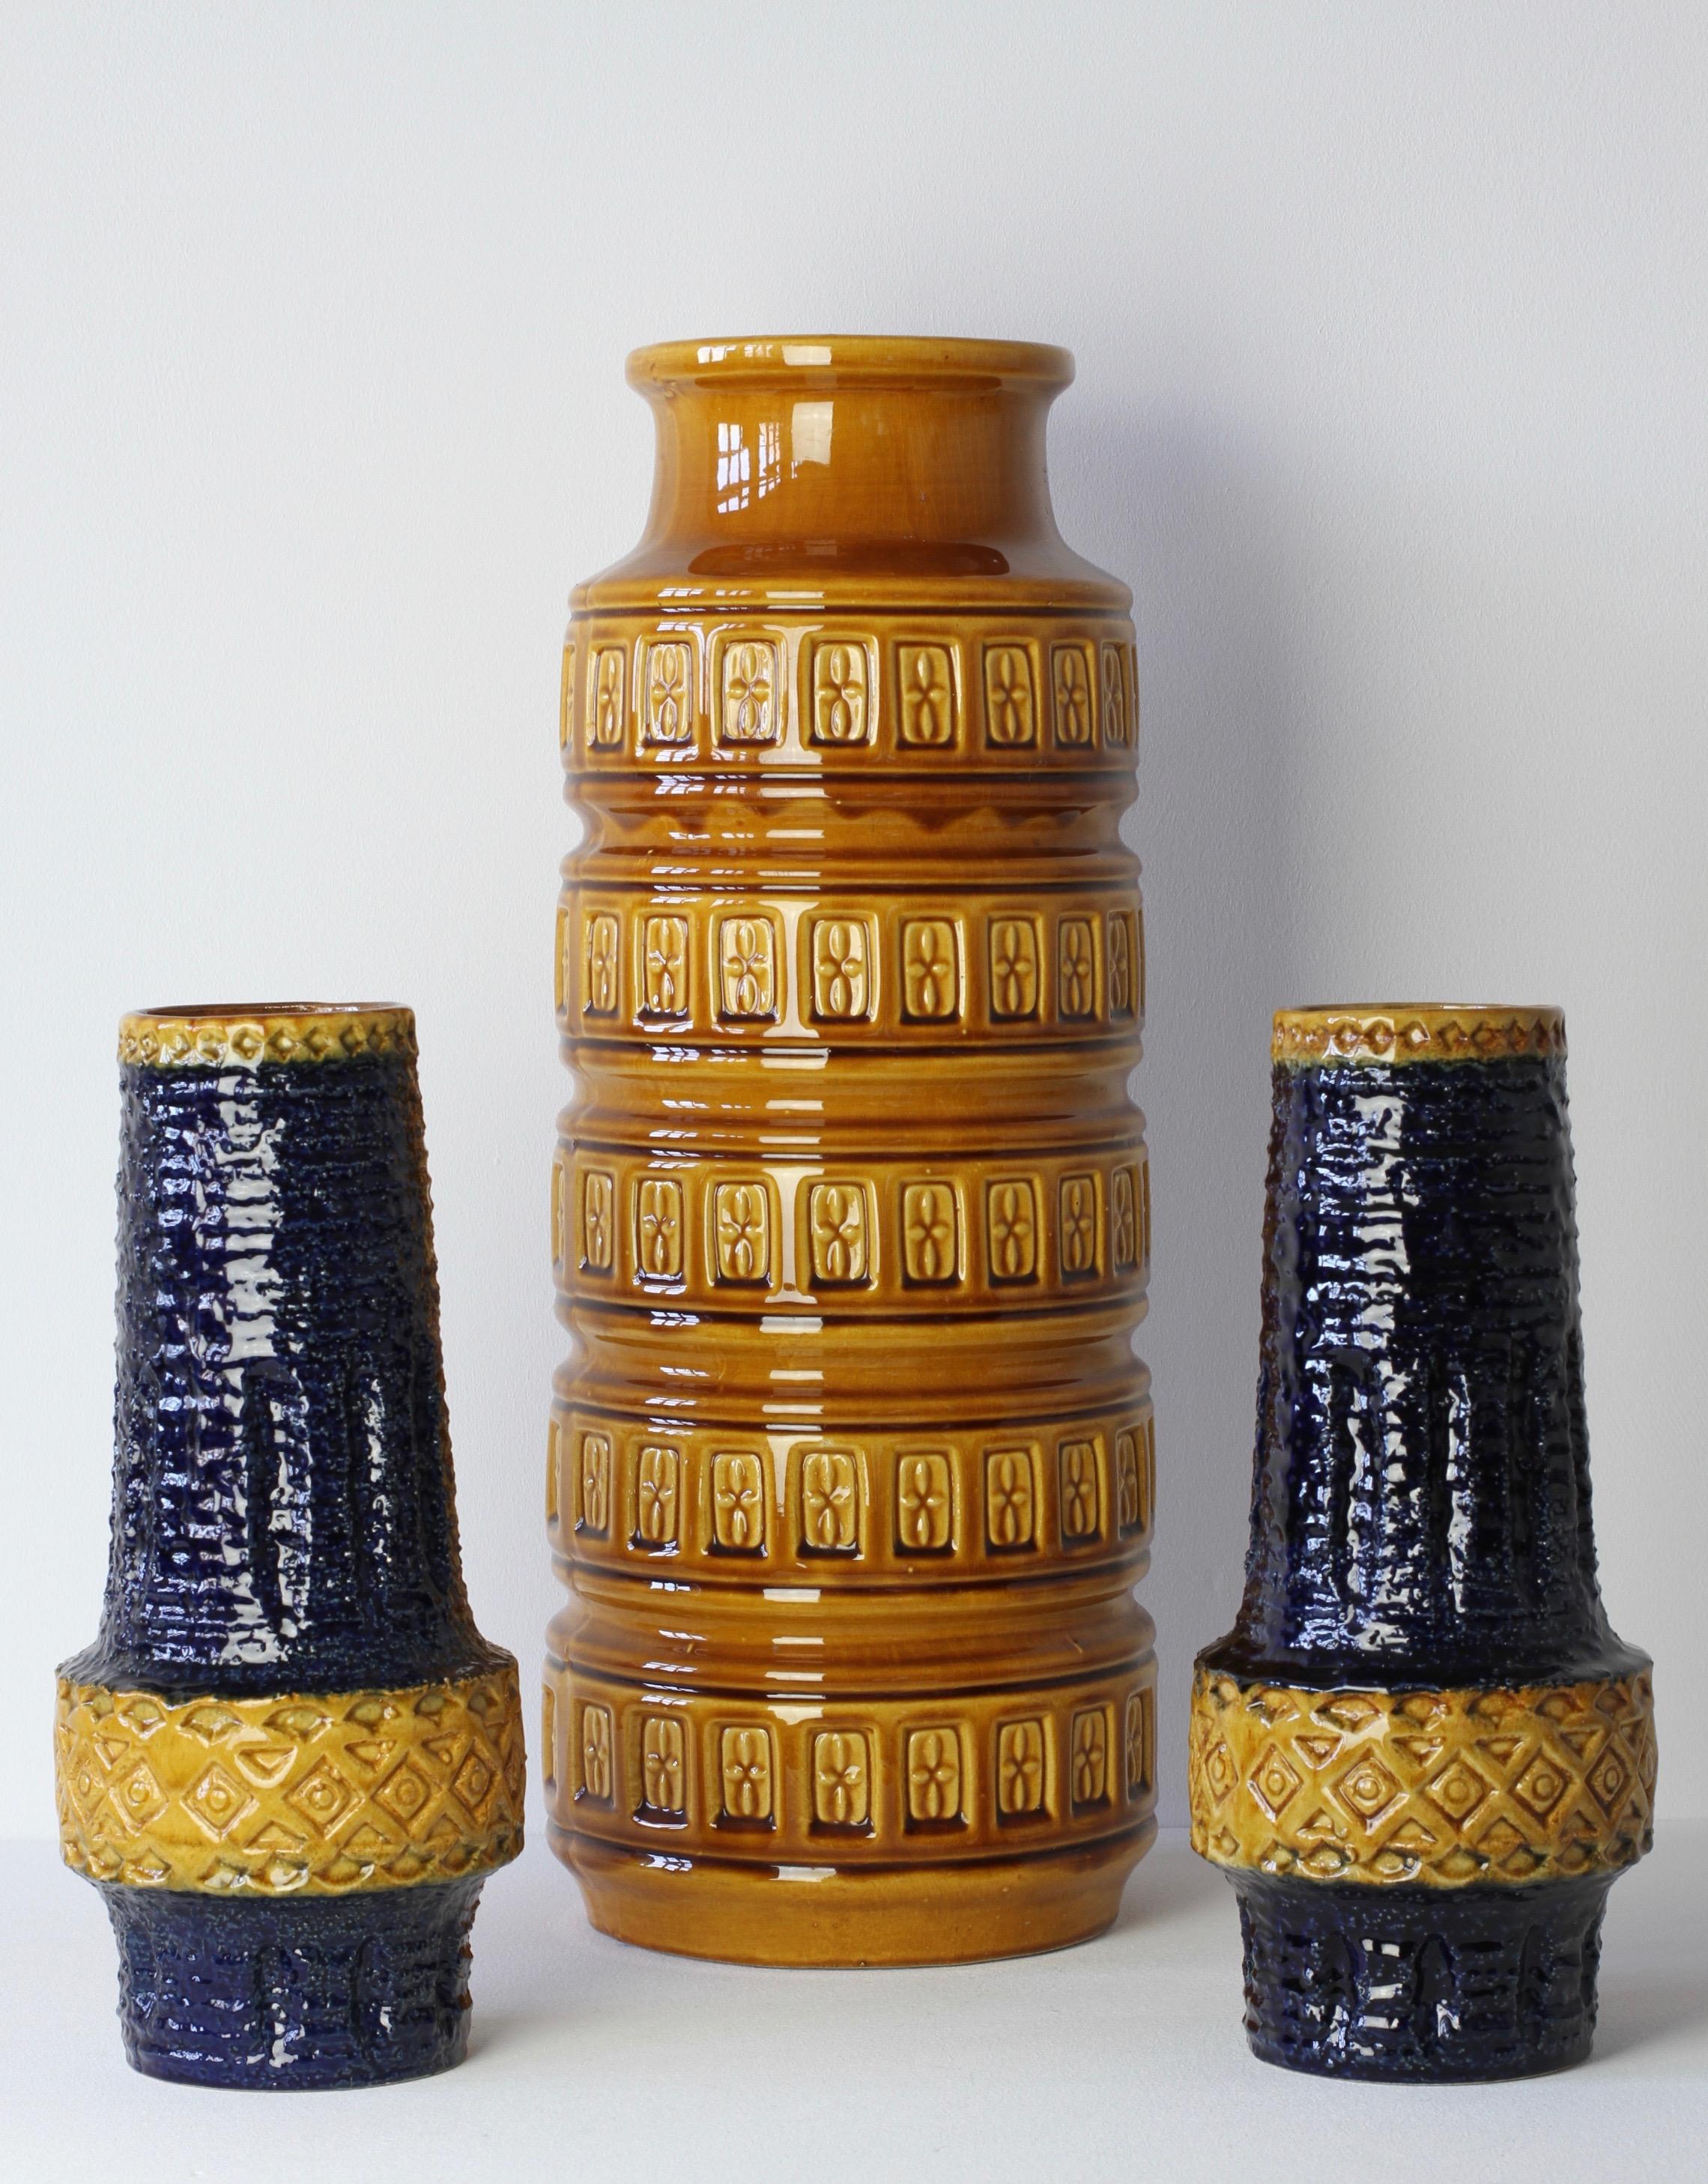 Trio of tall vintage midcentury vases by West German Pottery producers - 'Bay Keramik' and 'Spara', Germany, circa 1970s. The embossed relief pattern on the pair of Spara vases is not dissimilar to the style of Italian pottery designer Aldo Londi